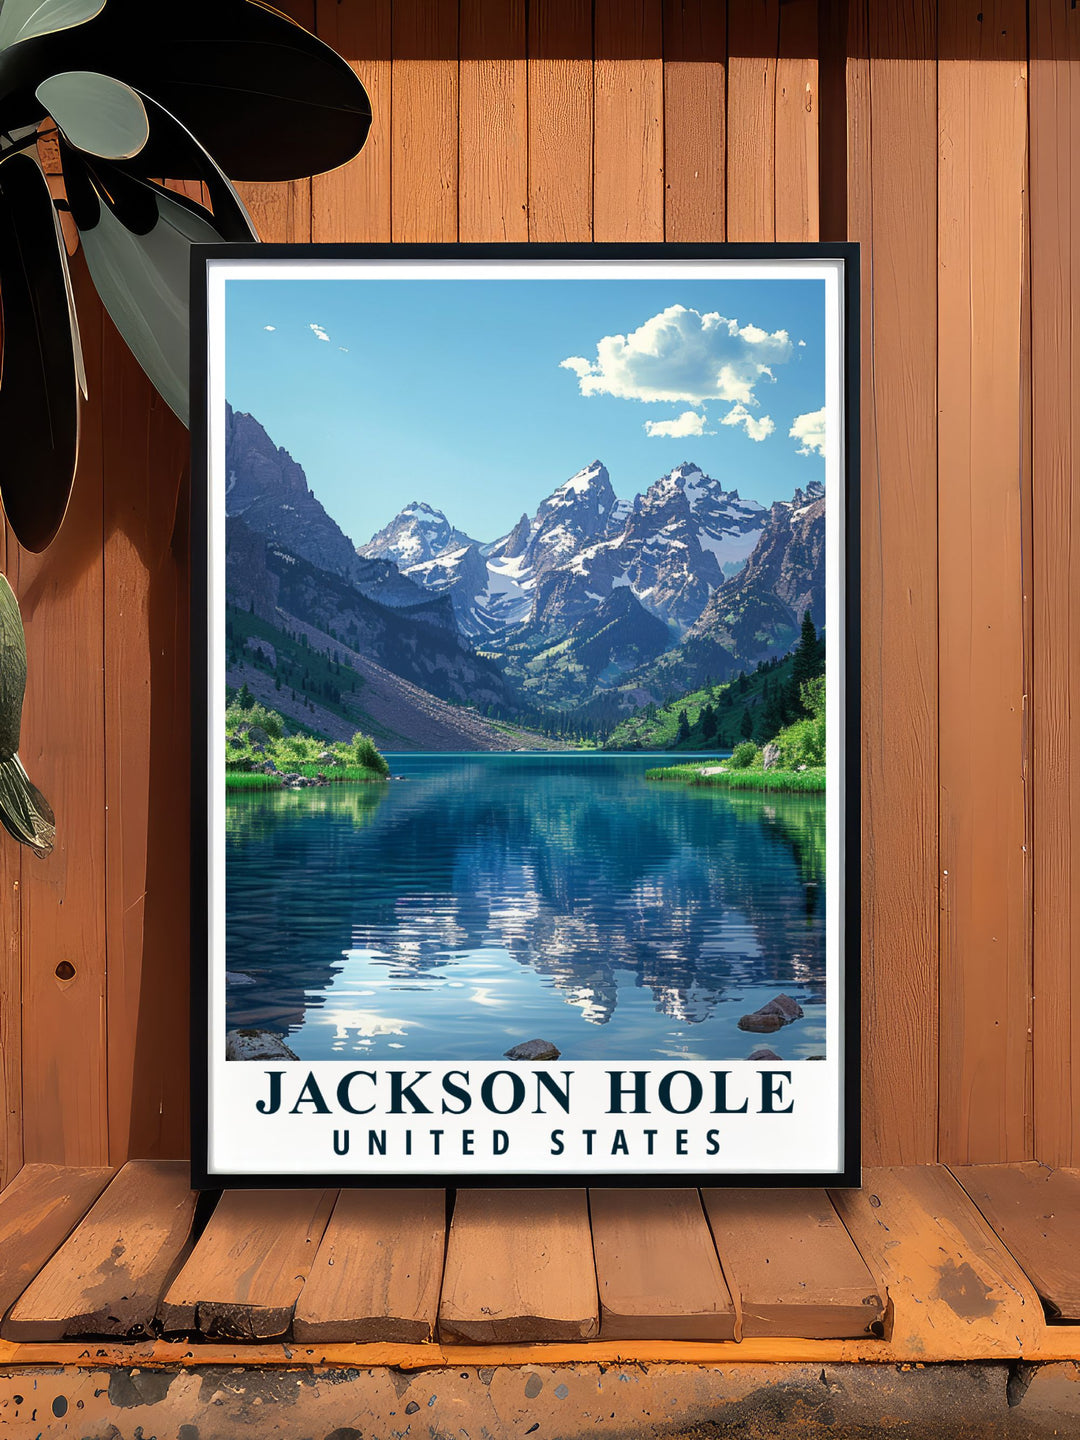 Highlighting the thrill of Corbets Couloir and the serene beauty of the Tetons, this travel print brings the spirit of Jackson Hole into your home.